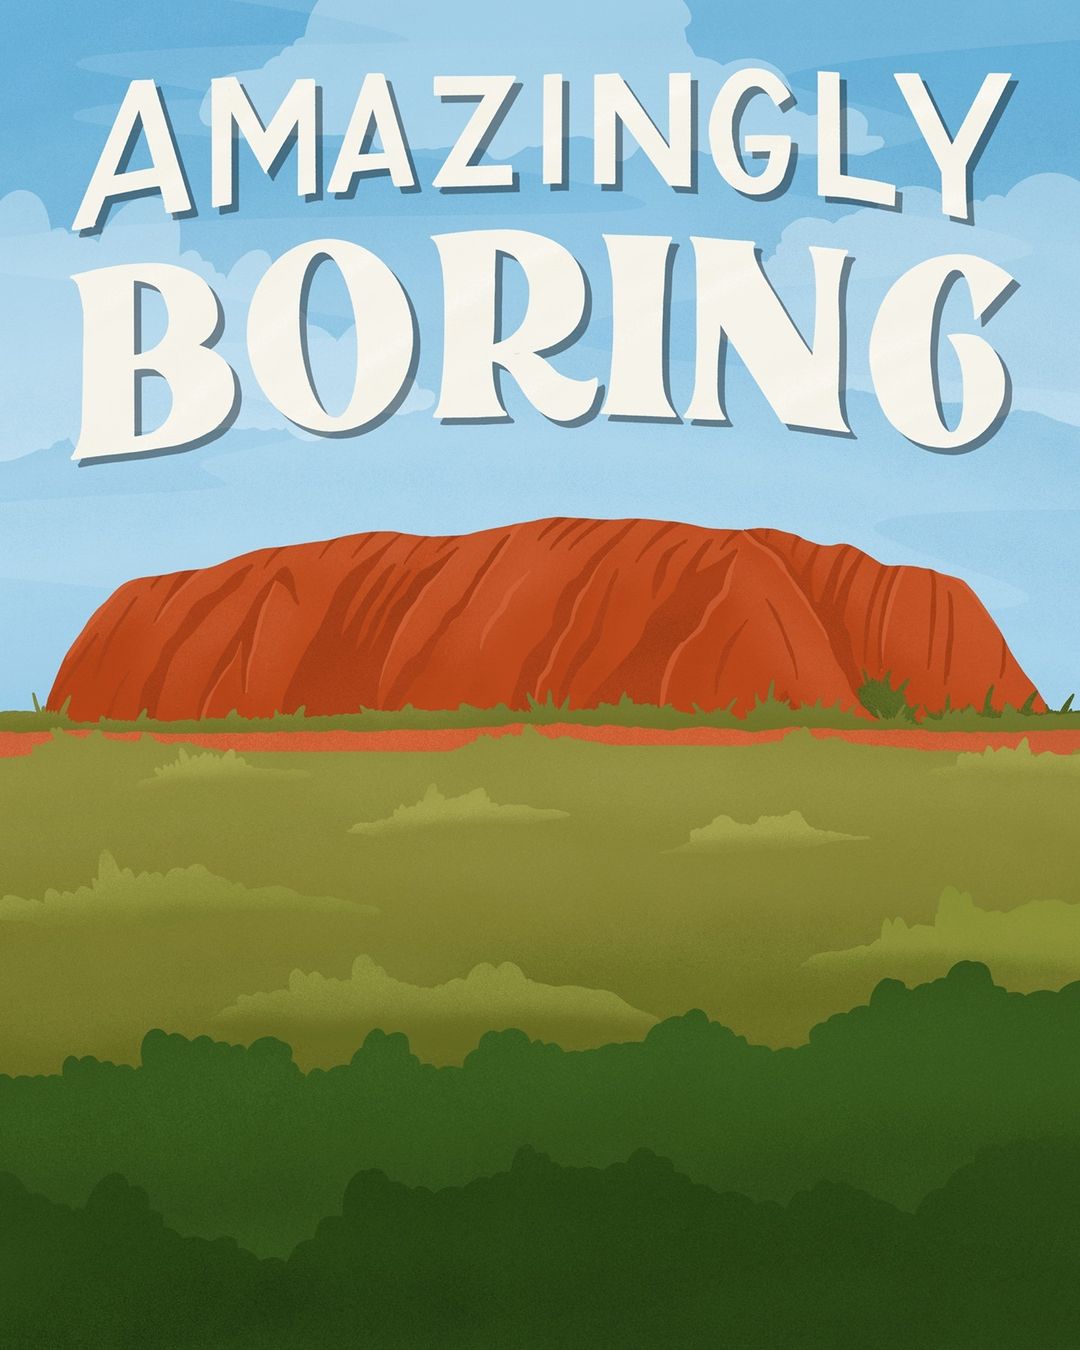 funny-national-park-review-posters-amber-share-2